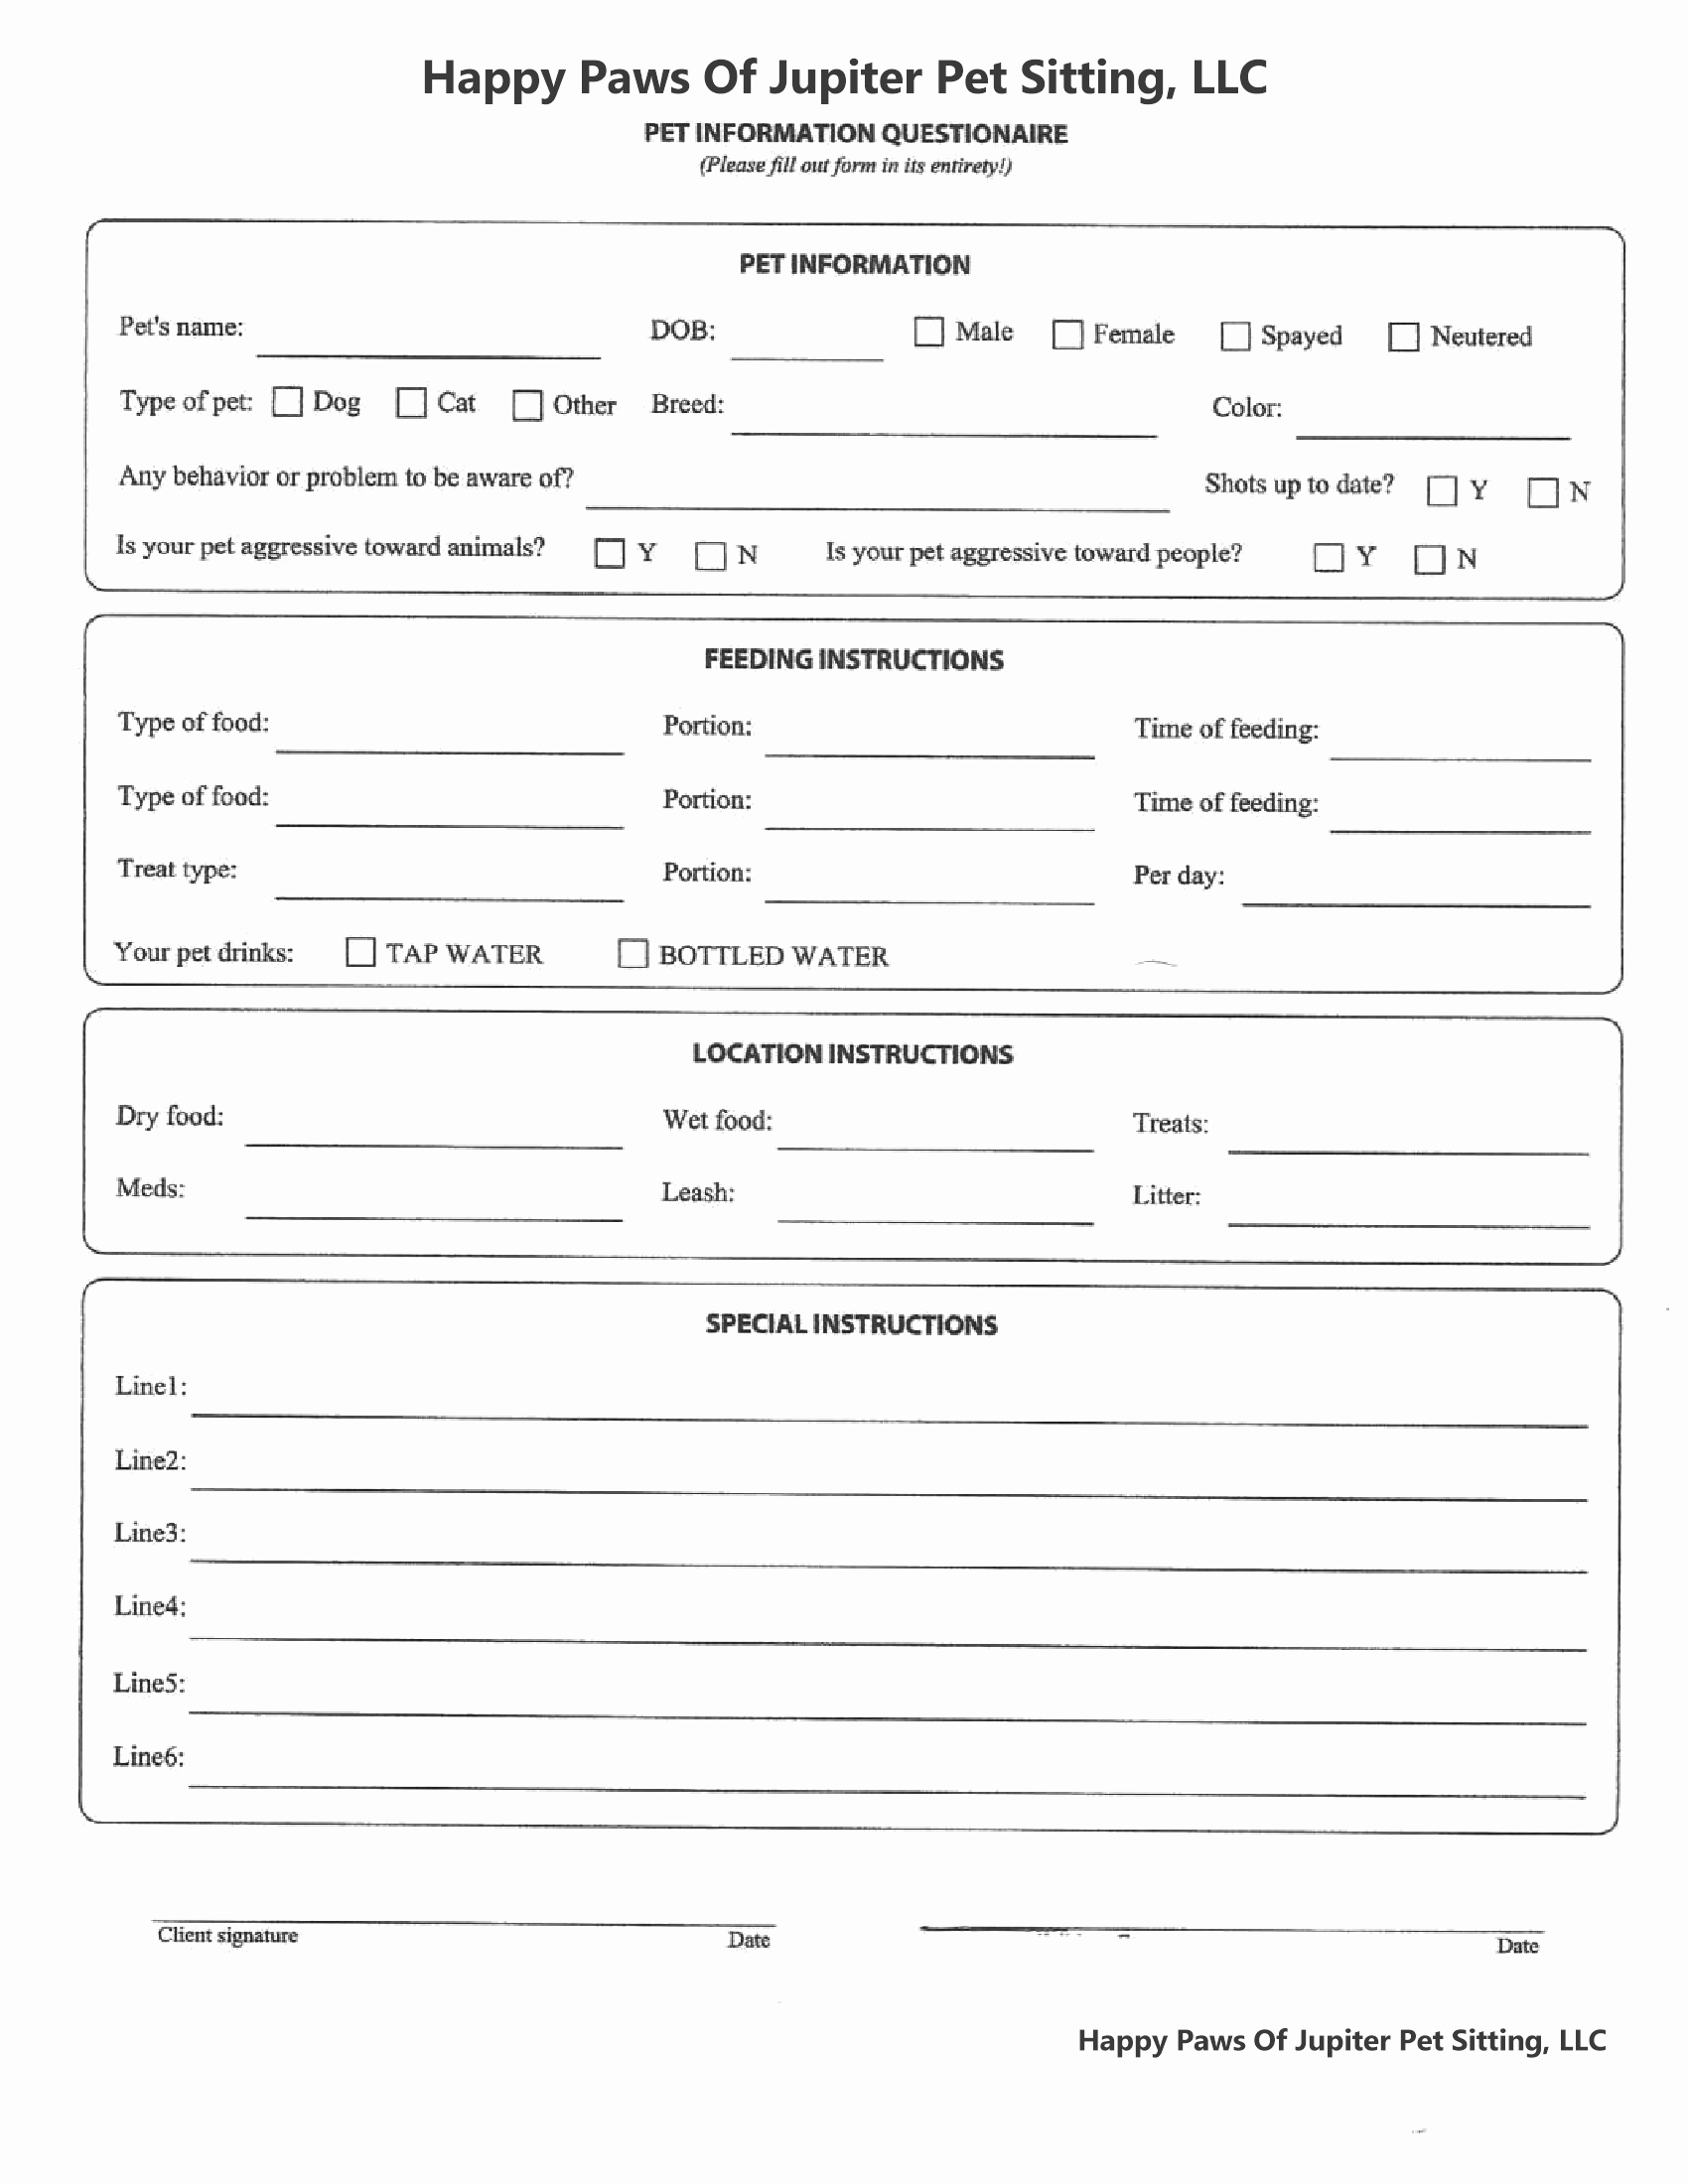 Pet Sitting Client Information form Awesome forms – Happy Paws